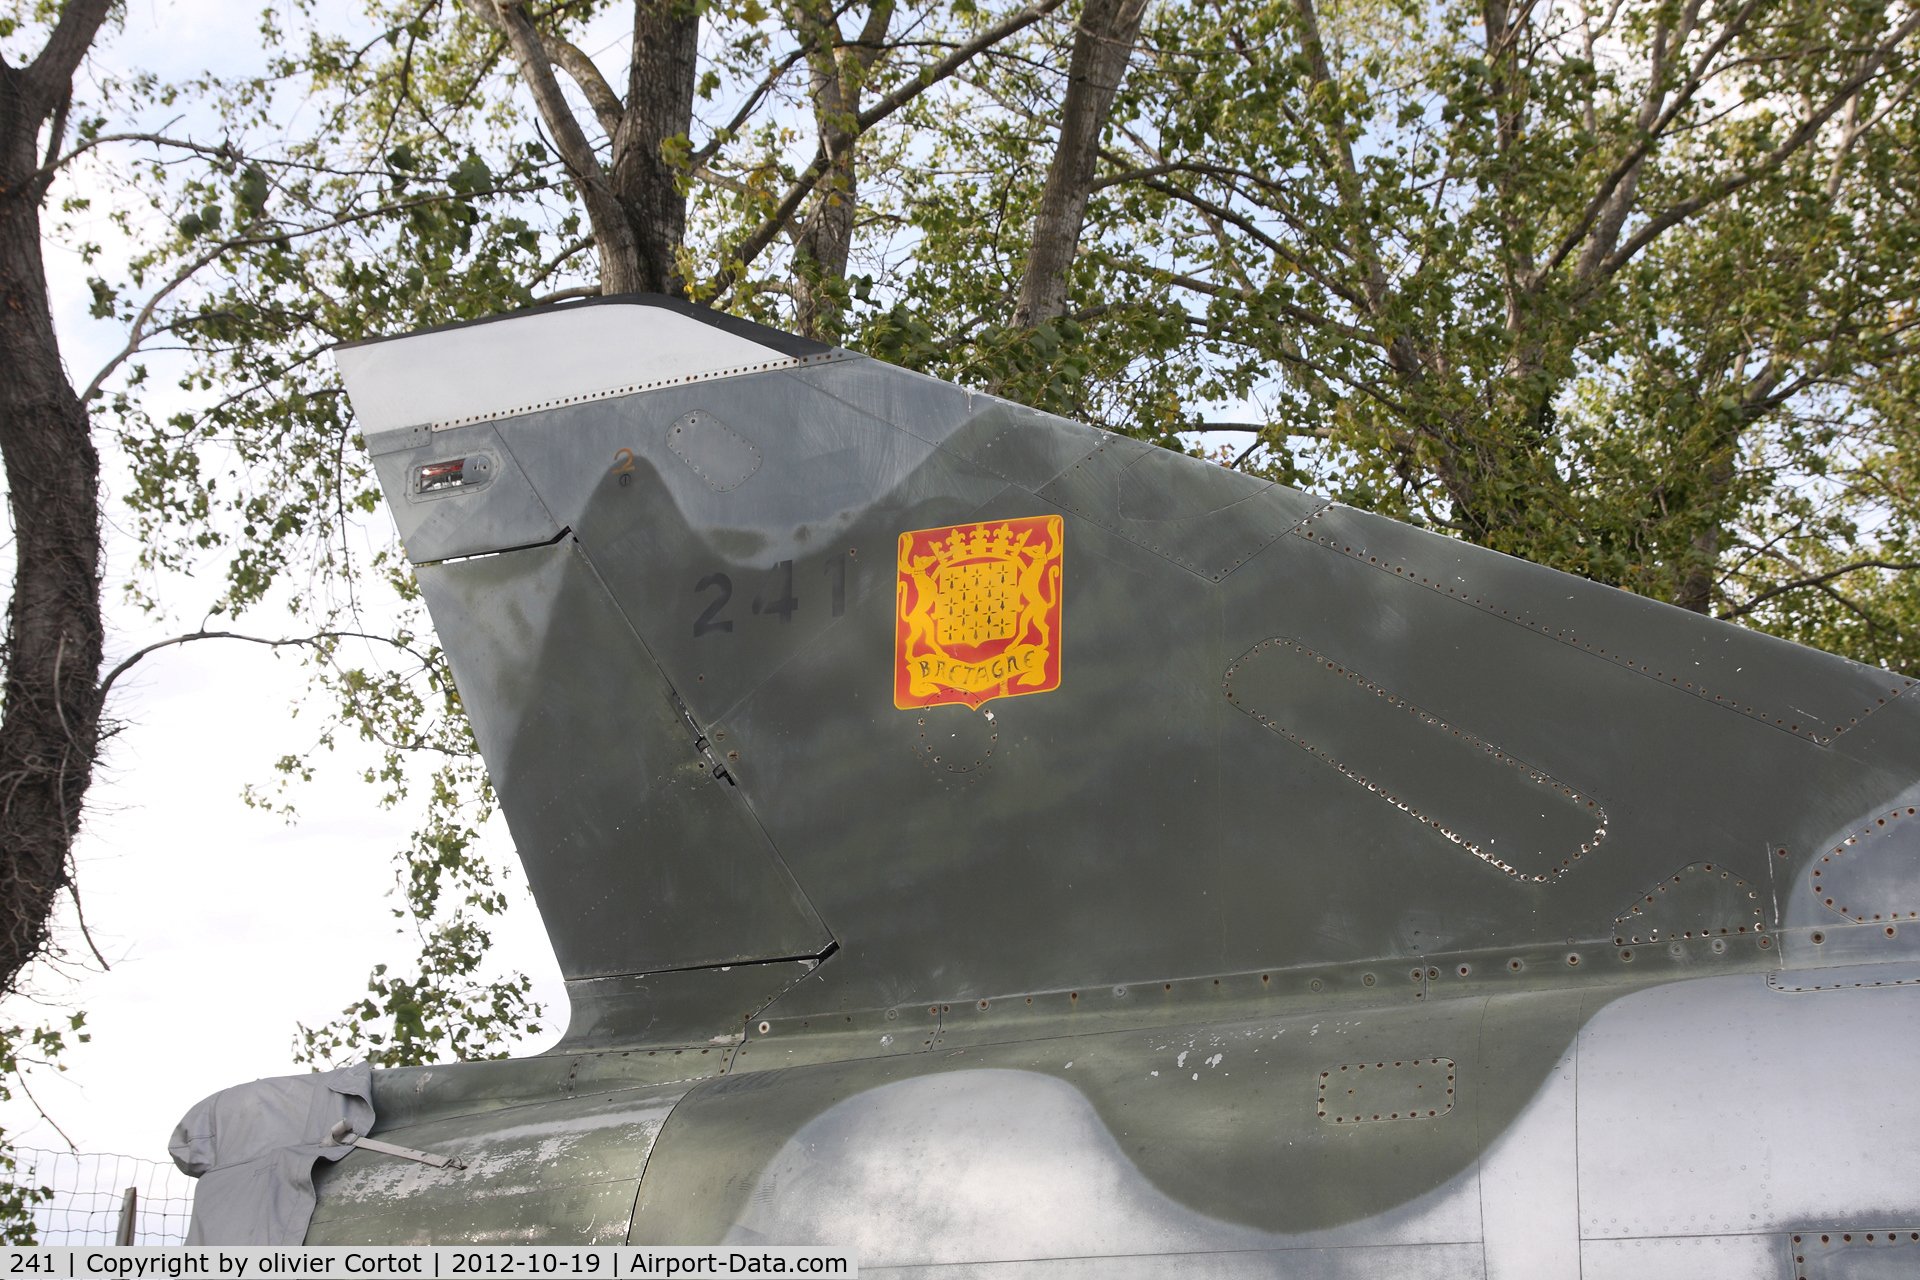 241, Dassault Mirage IIIB-RV C/N 241, view of the tail insigna, the 